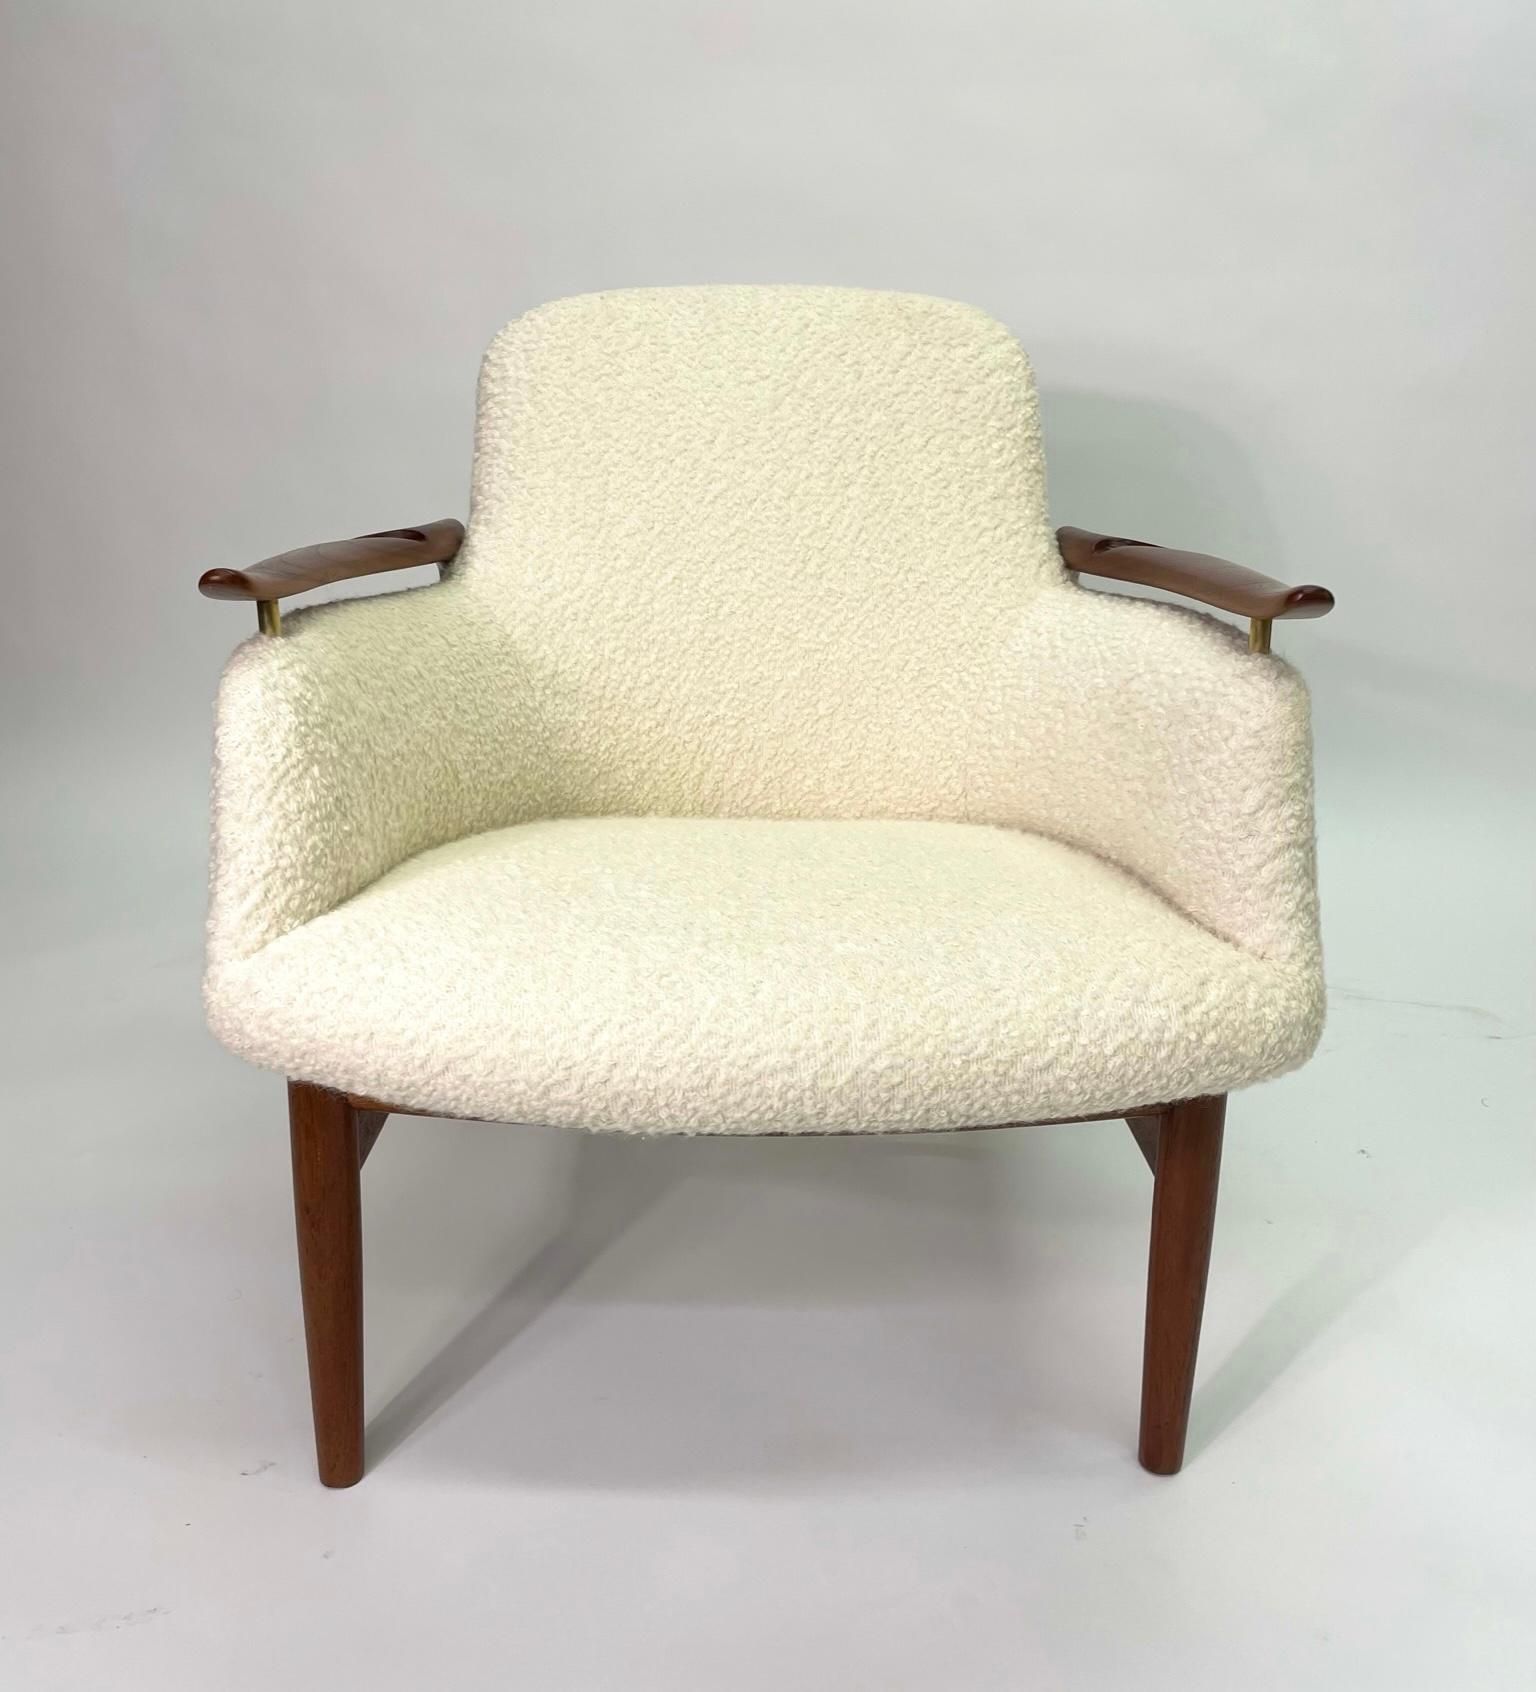 A rare example of the stunning, chair by Danish design pioneer Finn Juhl. The NV-53 is named after its cabinetmaker, Niels Vodder, and the year of its design, 1953. Its biomorphic shape—influenced by the Surrealists—and unique, floating design give